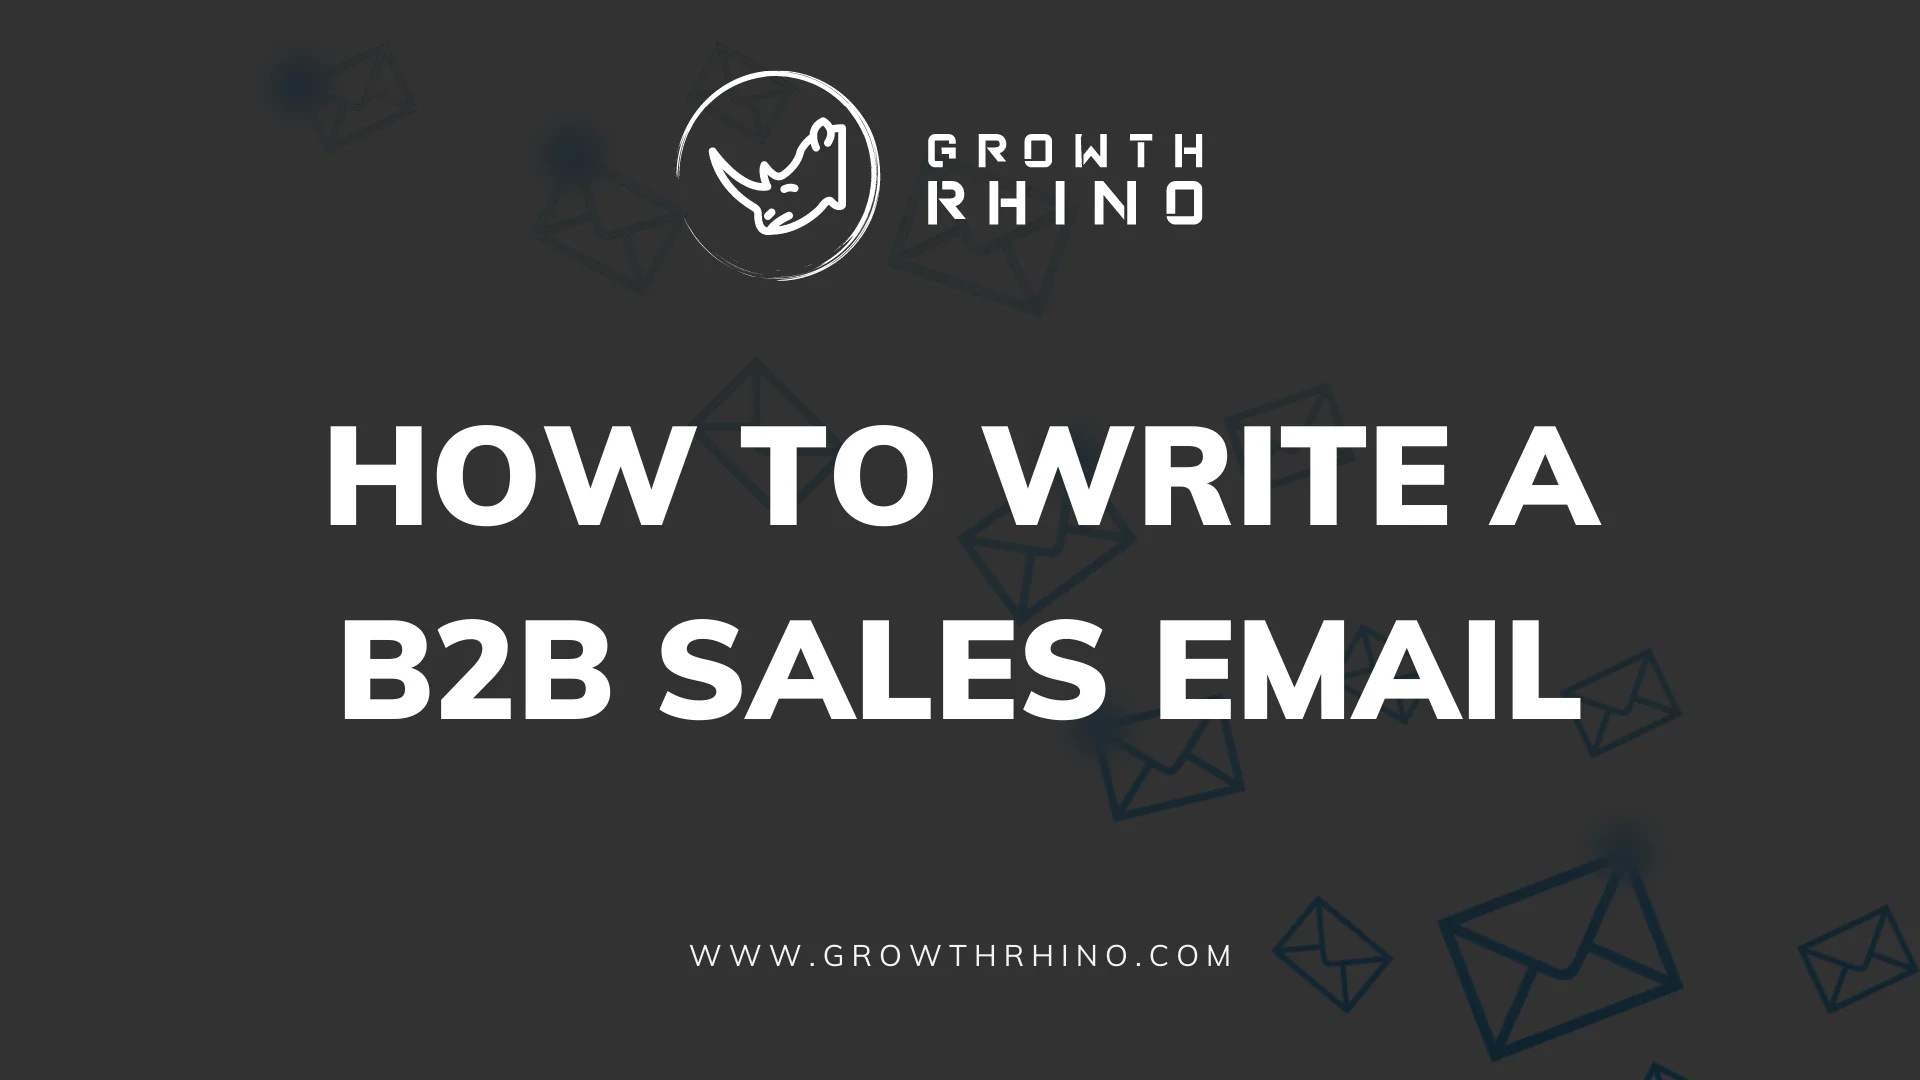 How to Write a B2B Sales Email